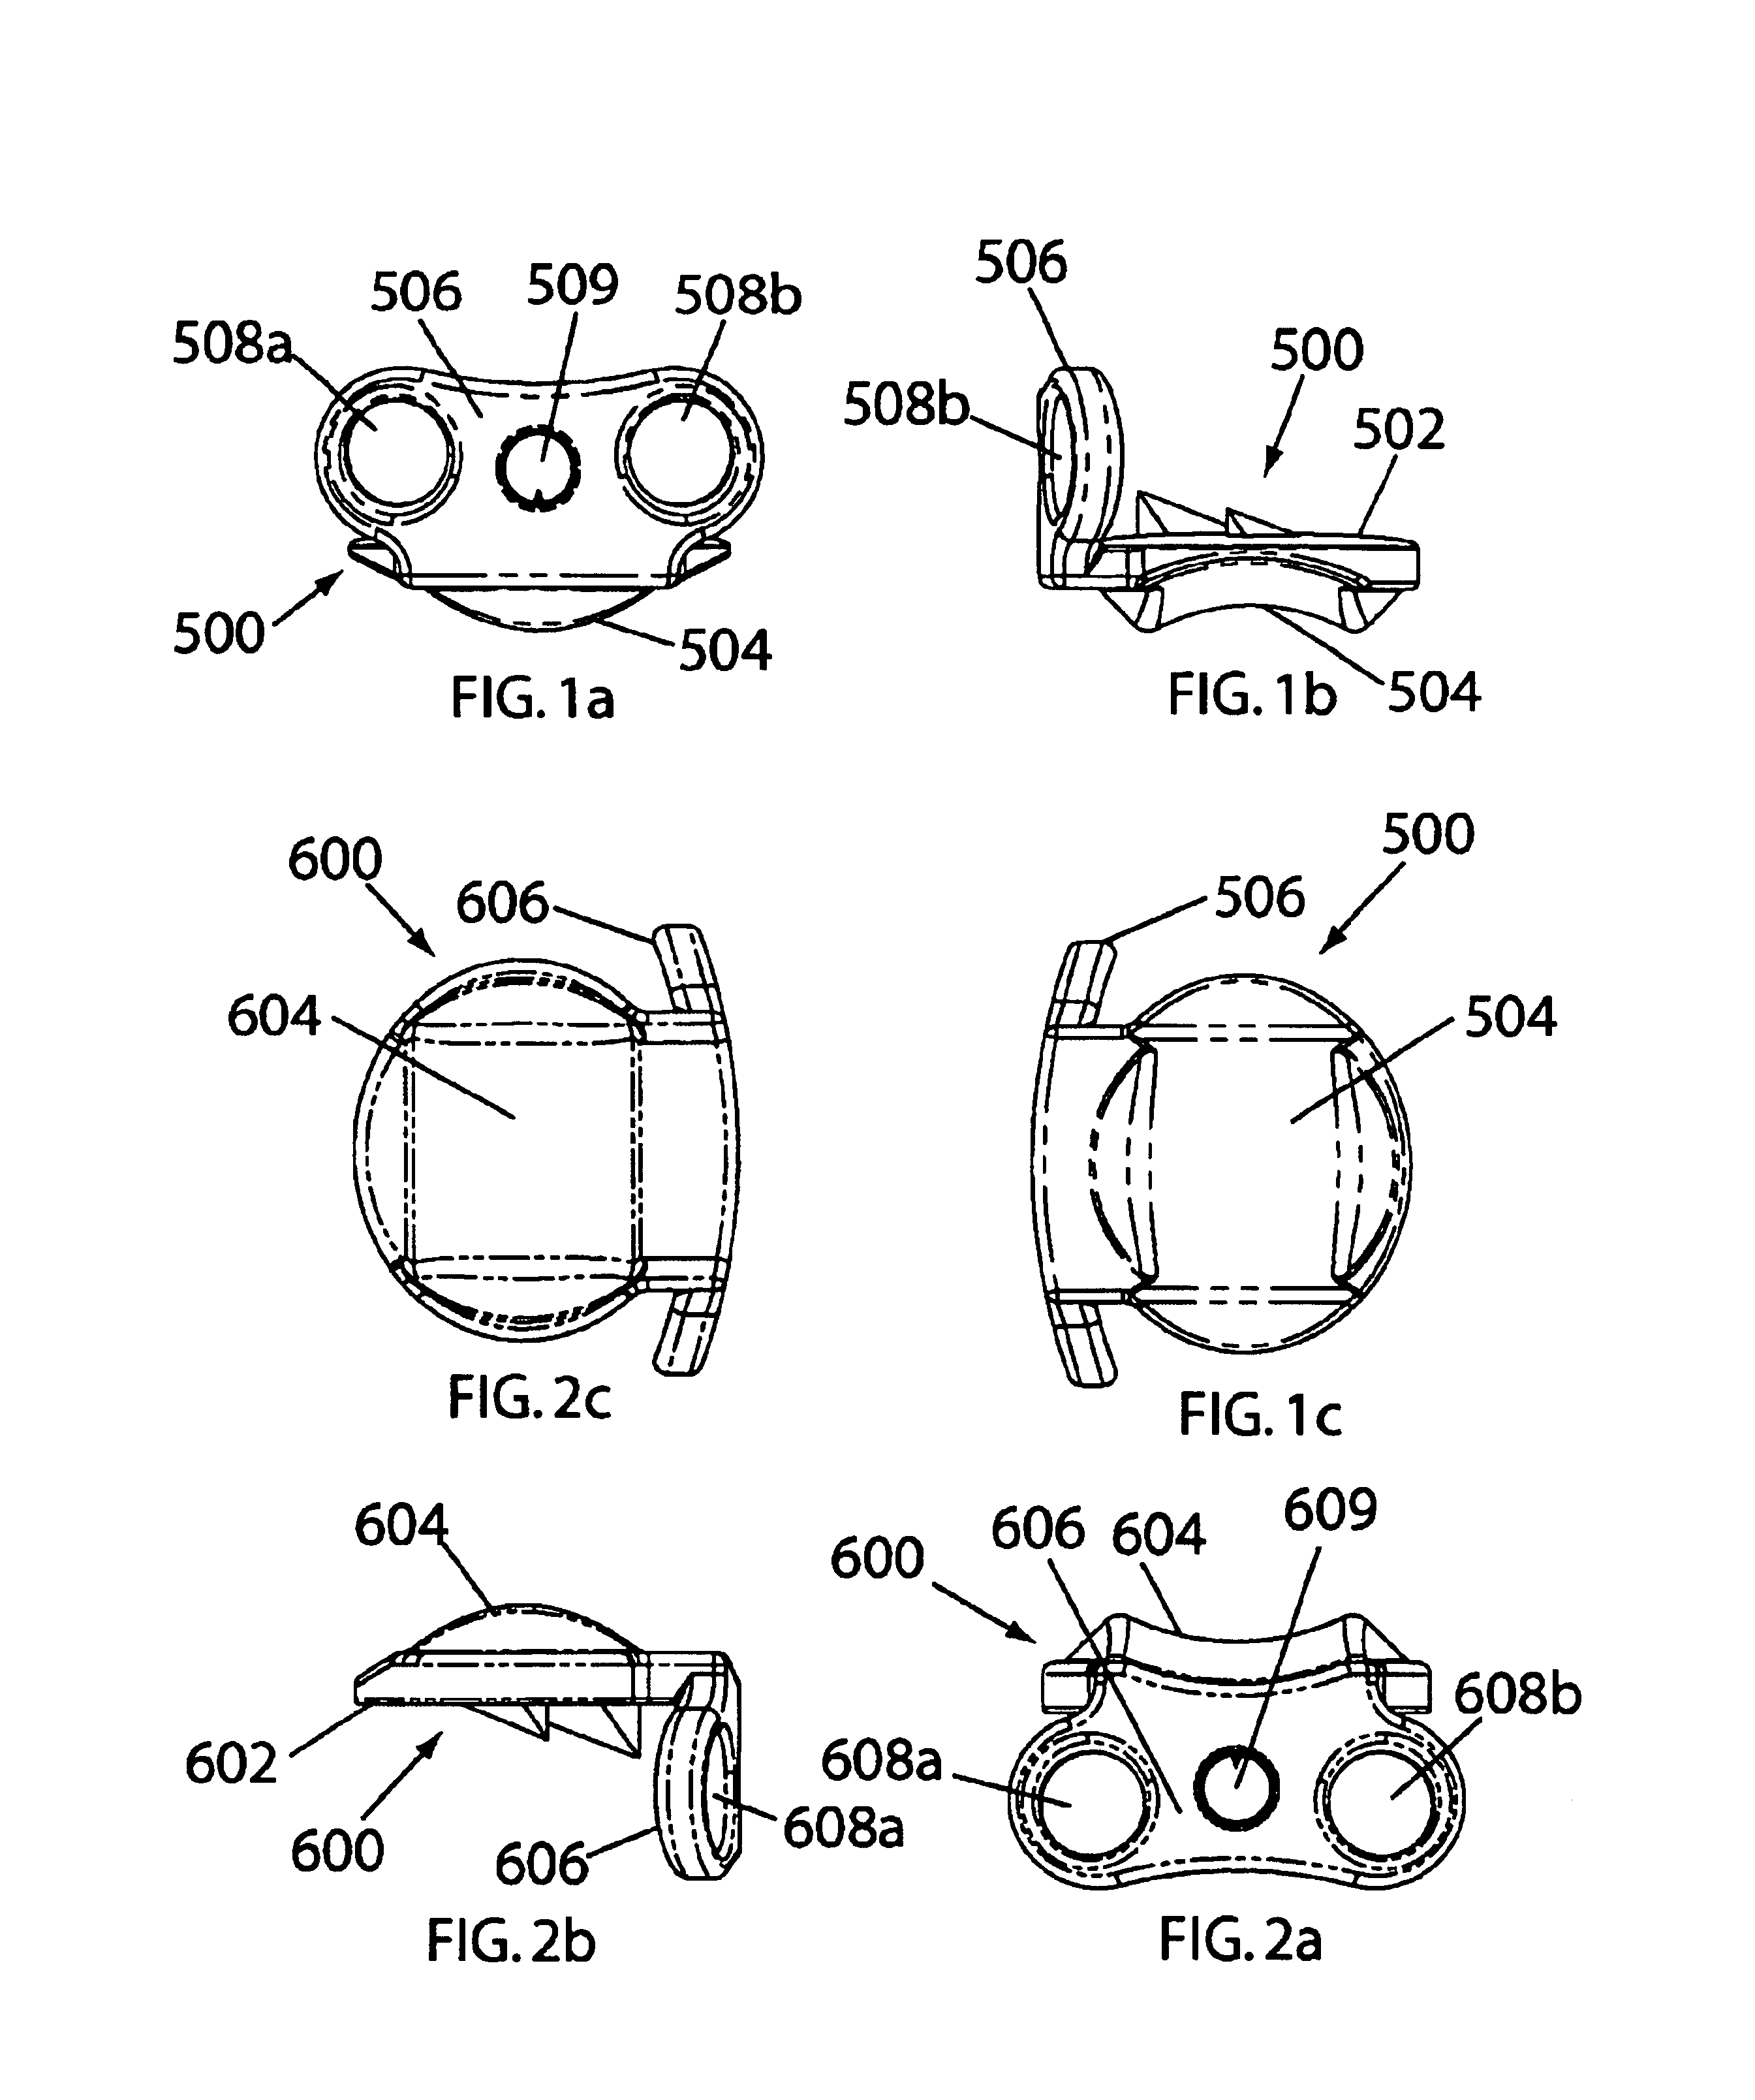 Instrumentation and methods for use in implanting a cervical disc replacement device